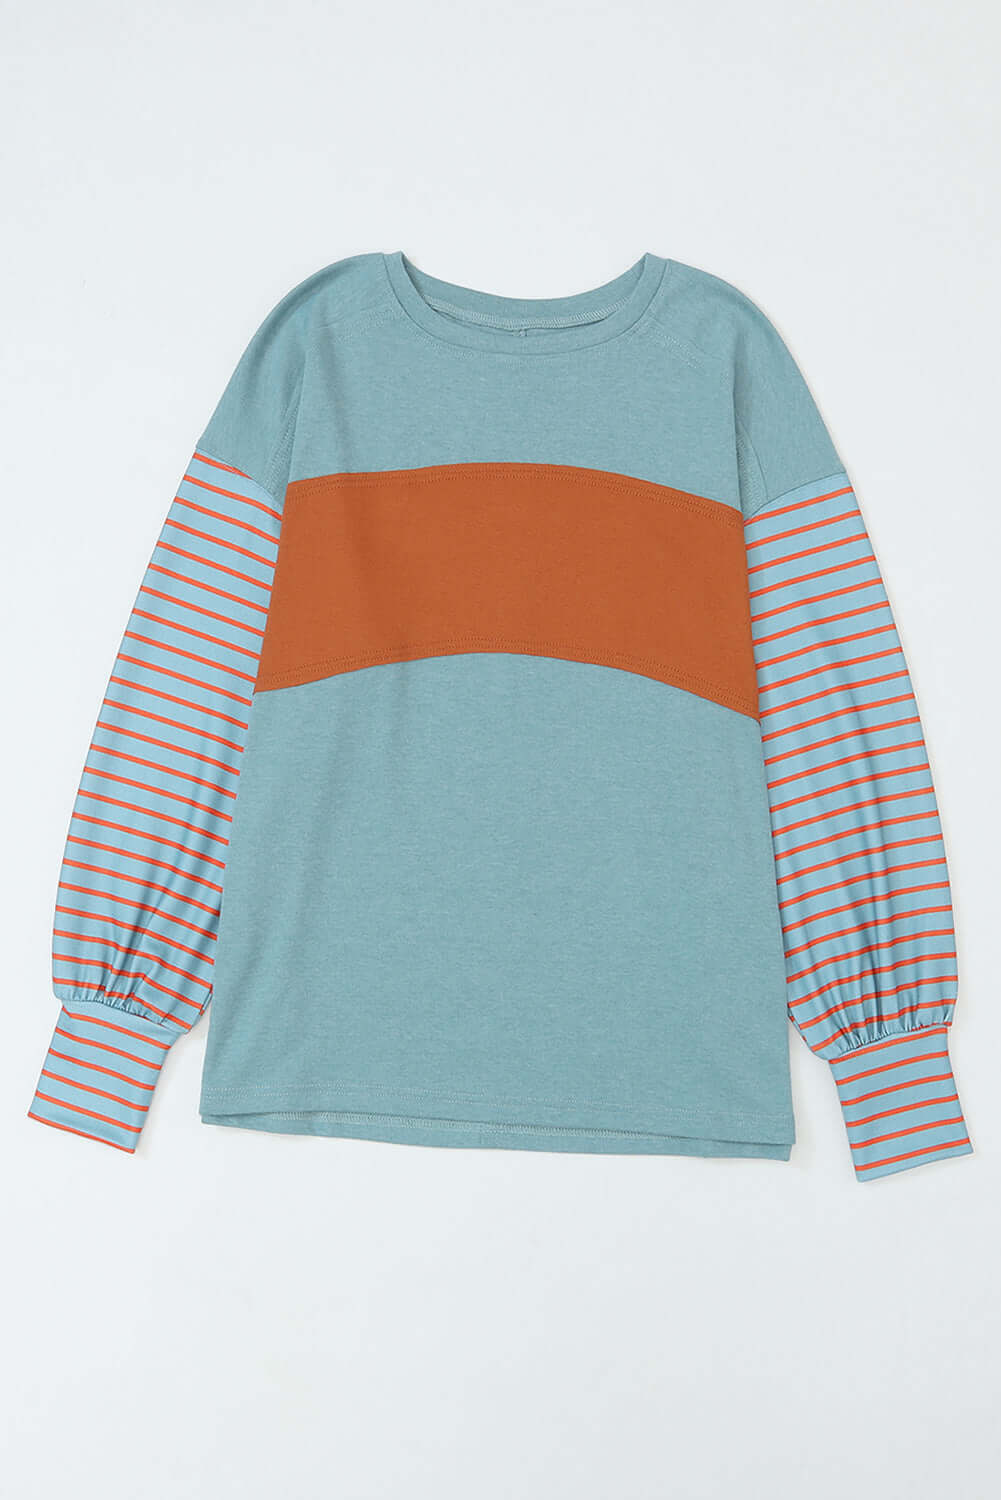 Green Colorblock Striped Bishop Sleeve Top - Dixie Hike & Style